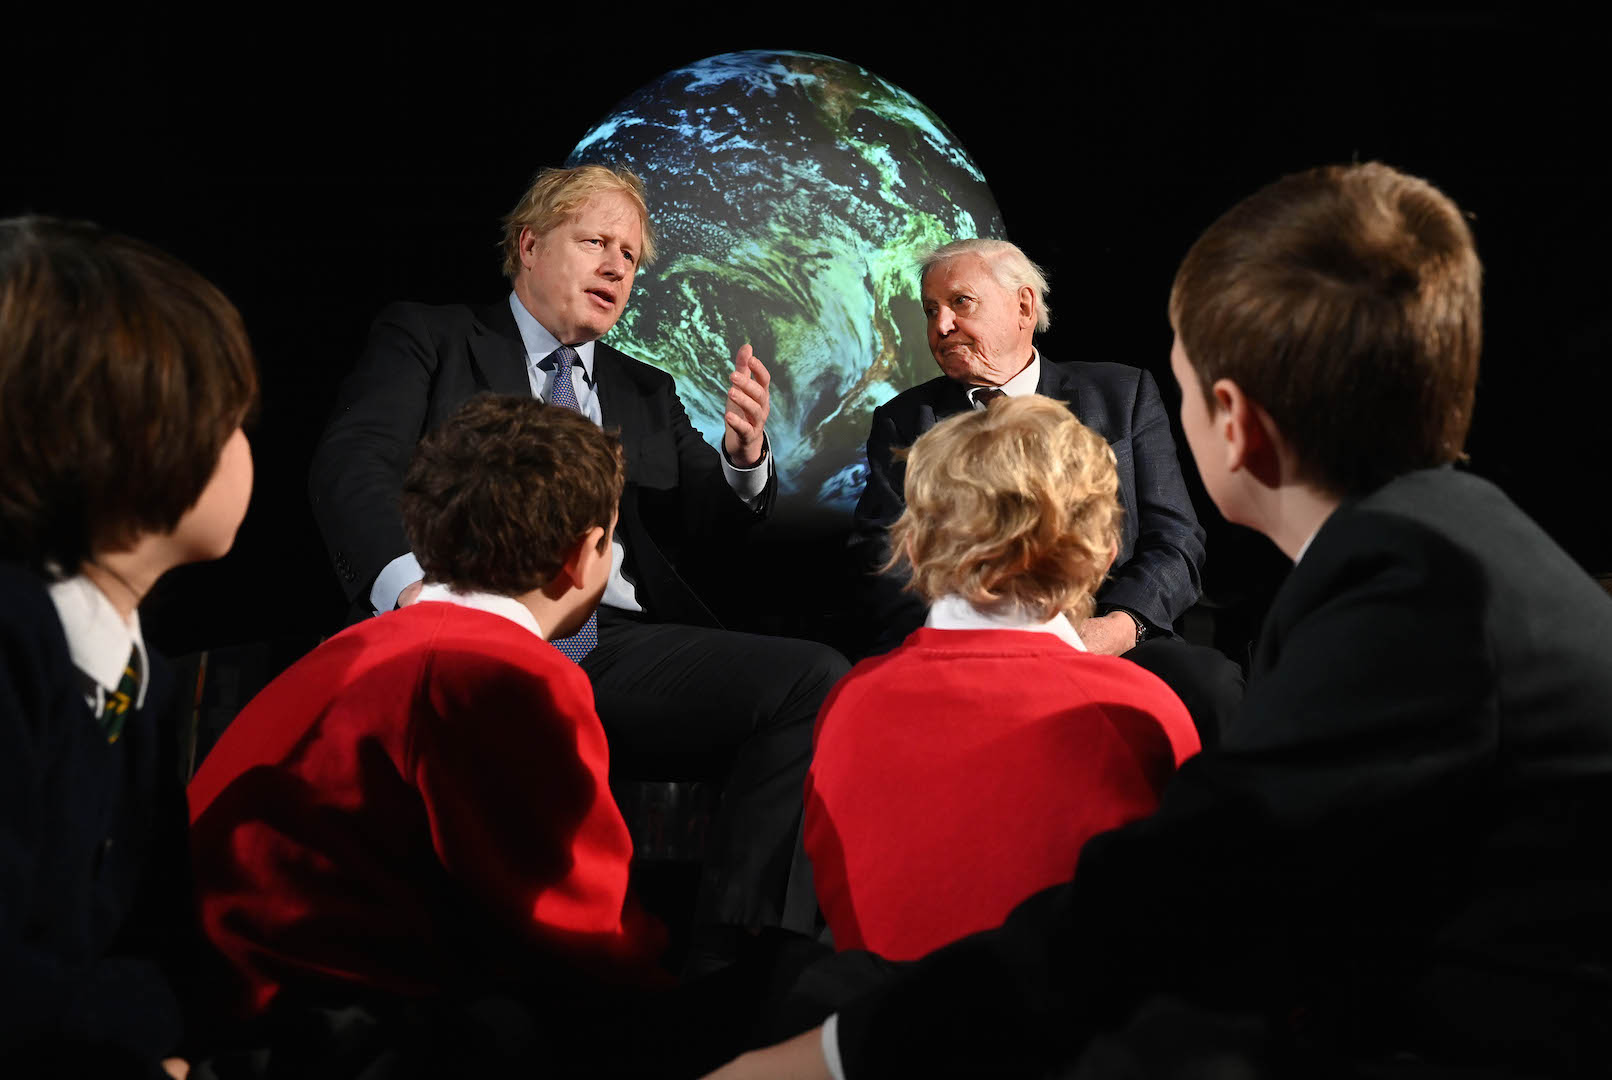 UK Prime Minister Boris Johnson and naturalist Sir David Attenborough at the launch of COP26 climate change talks